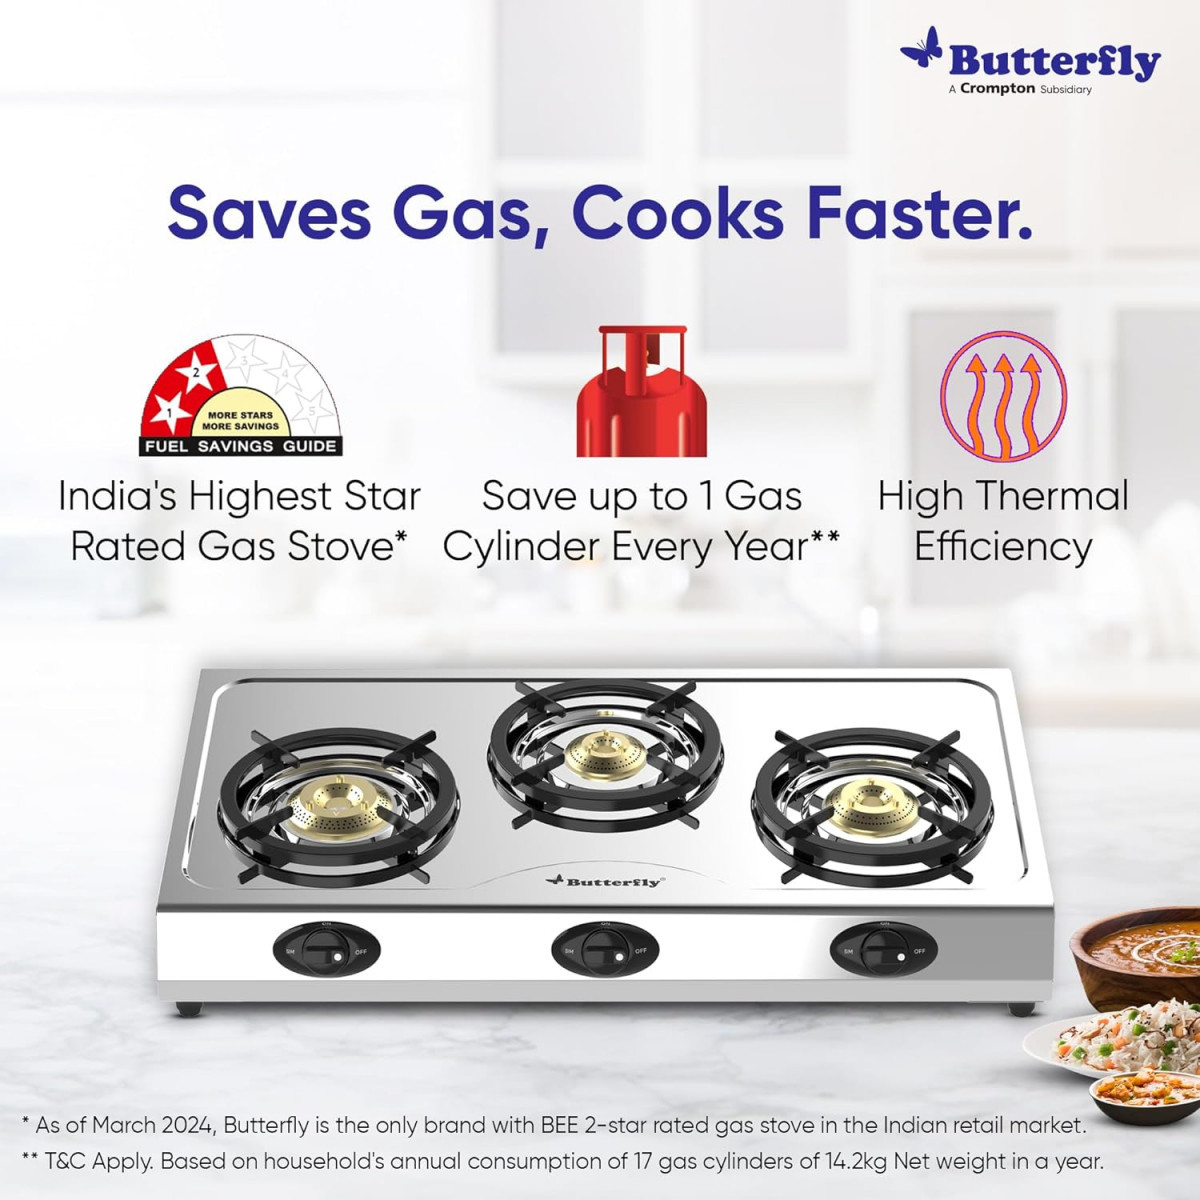 Butterfly Bolt Shakti 3B Stainless Steel Lpg Gas Stove  Saves 1 Gas Cylinder  Indias First Bee 2 Star Rated Gas Stove  Jumbo Burner  High Thermal Efficiency - Open